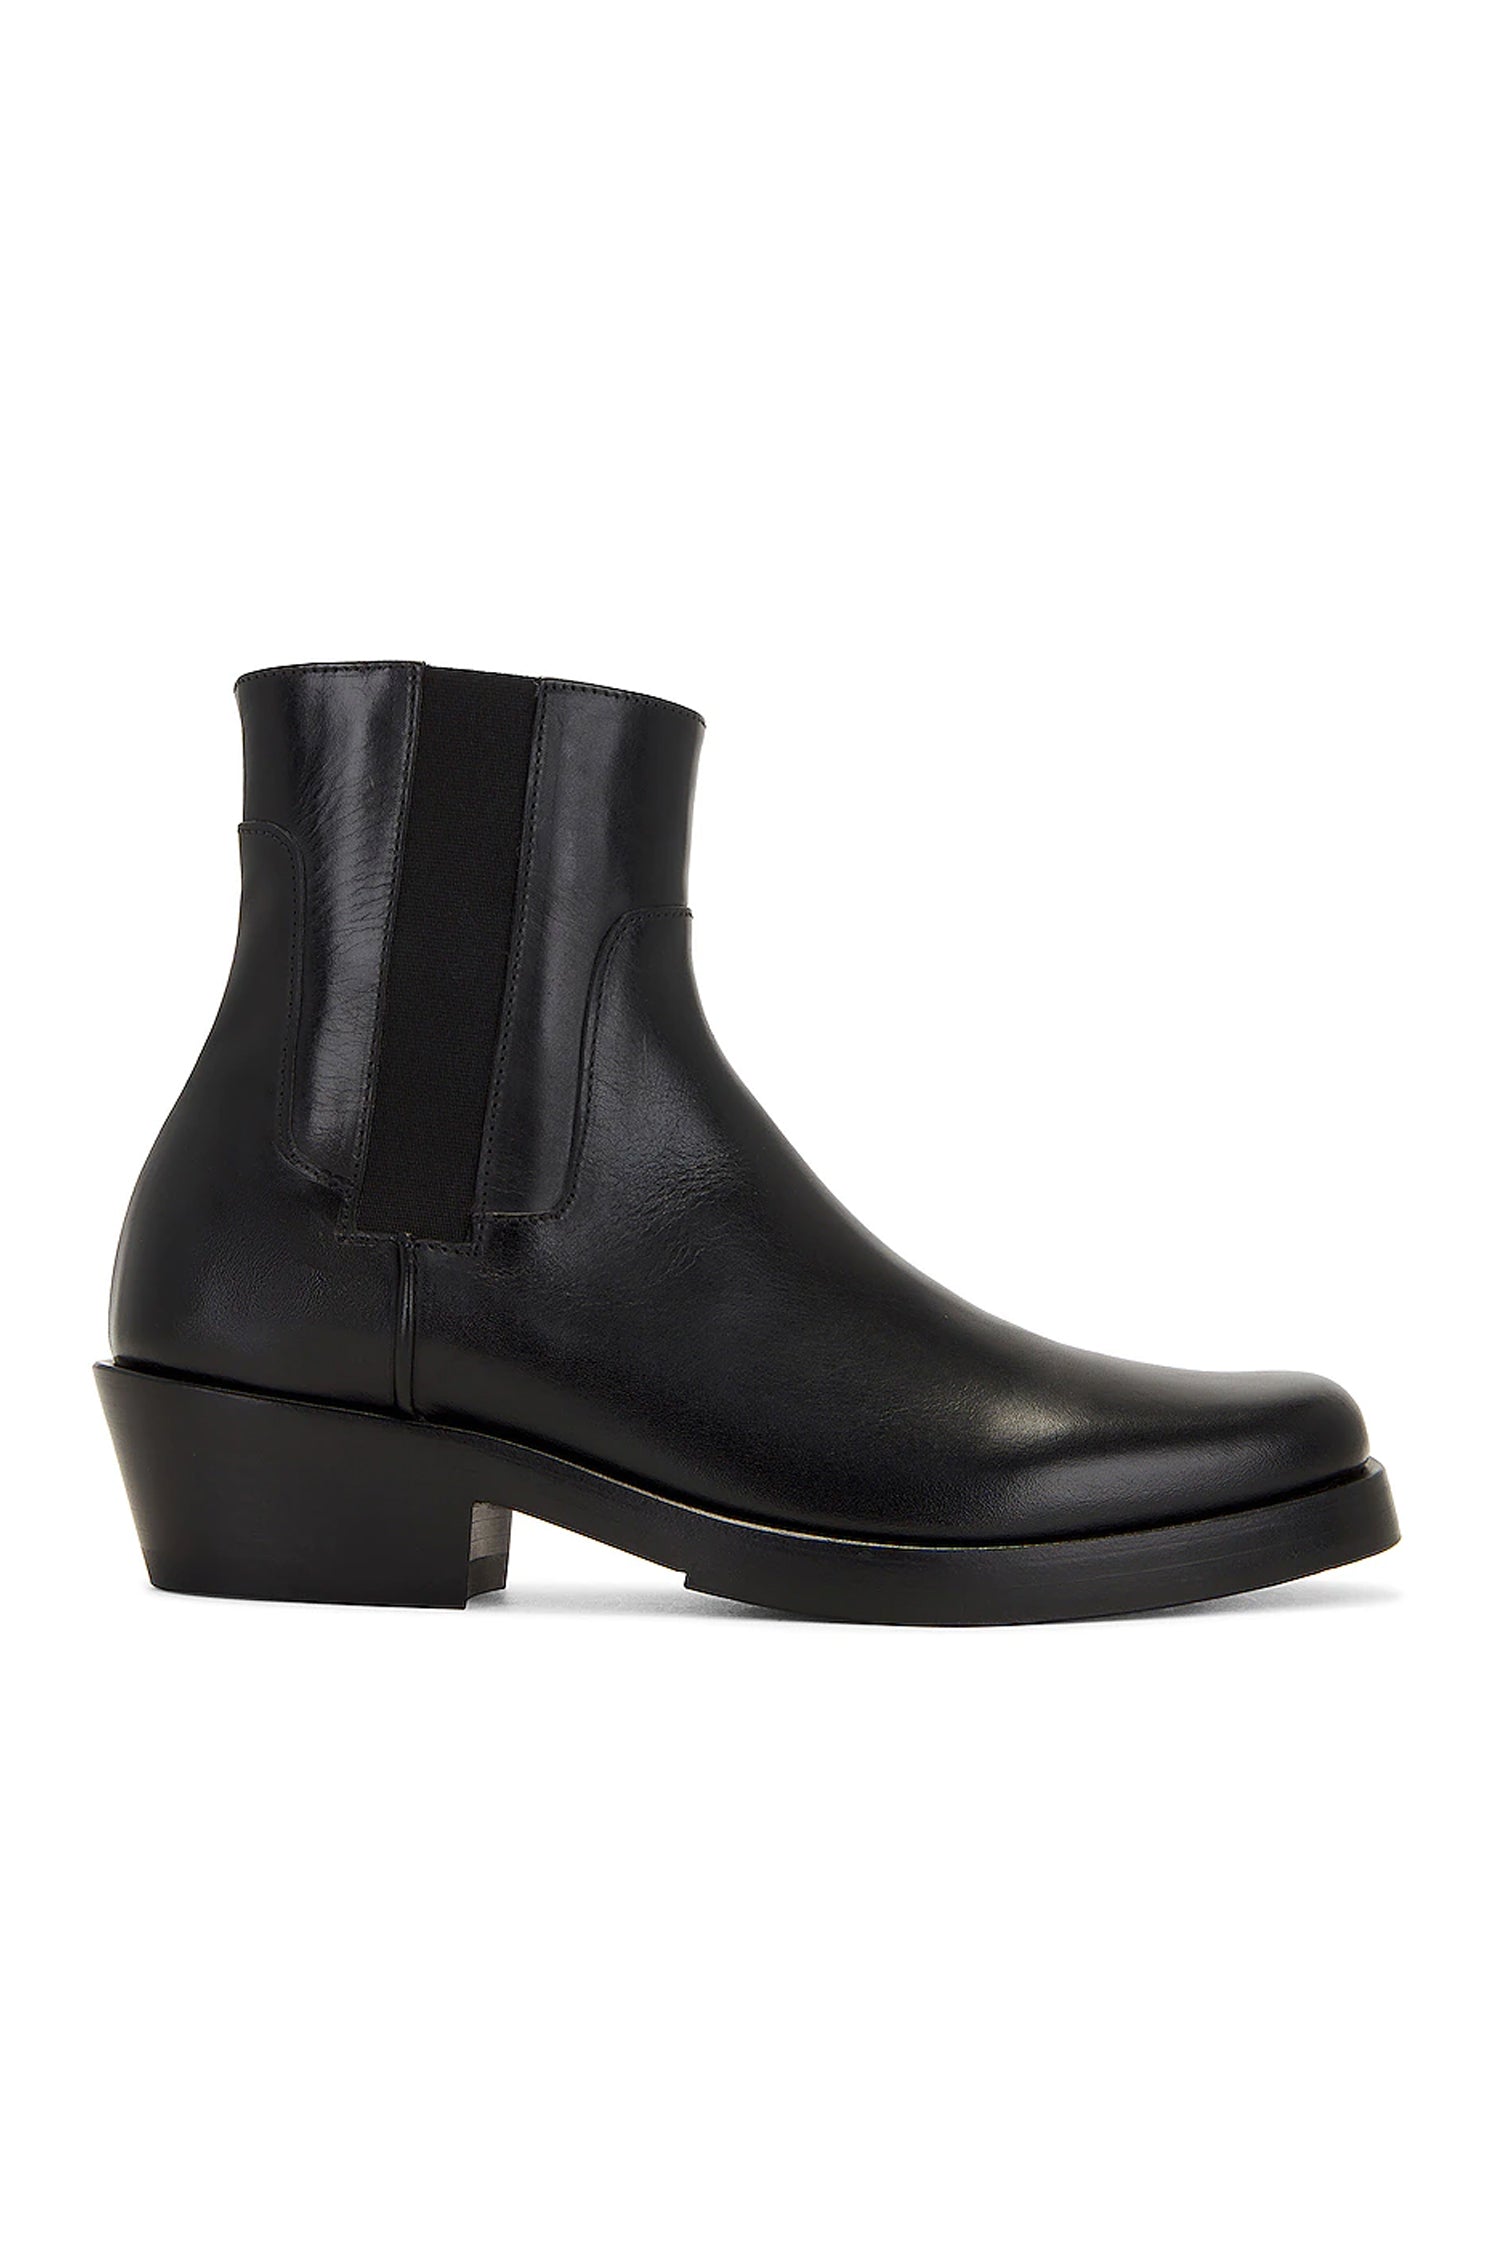 WESTERN ANKLE BOOT IN BLACK, FW22